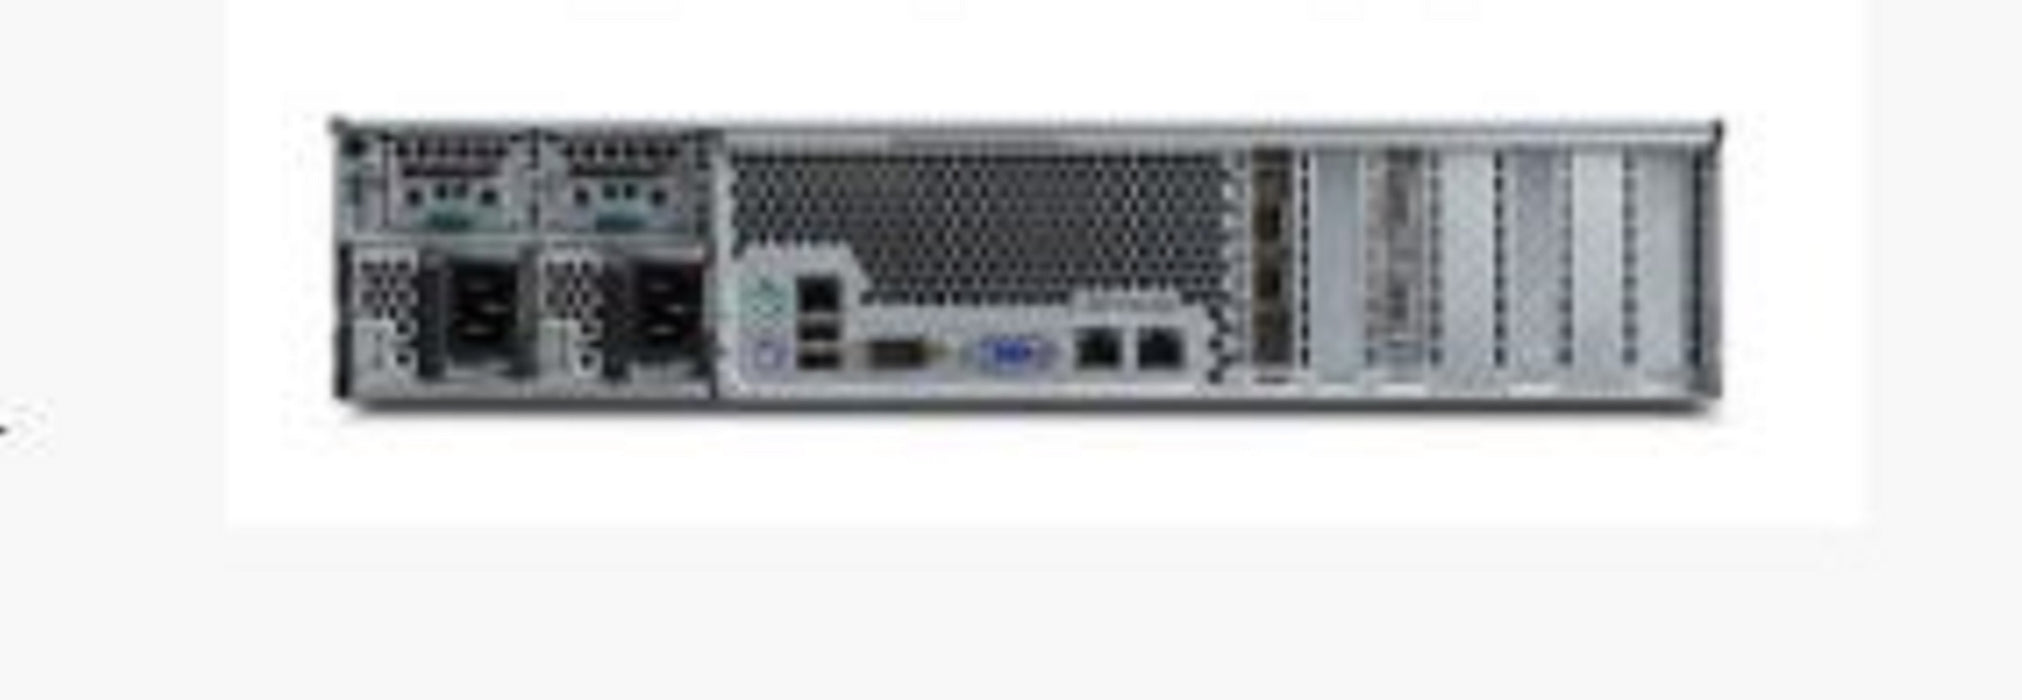 Isilon X200 240TB 10-Node Cluster with 2 x 12-Port Infiniband switches